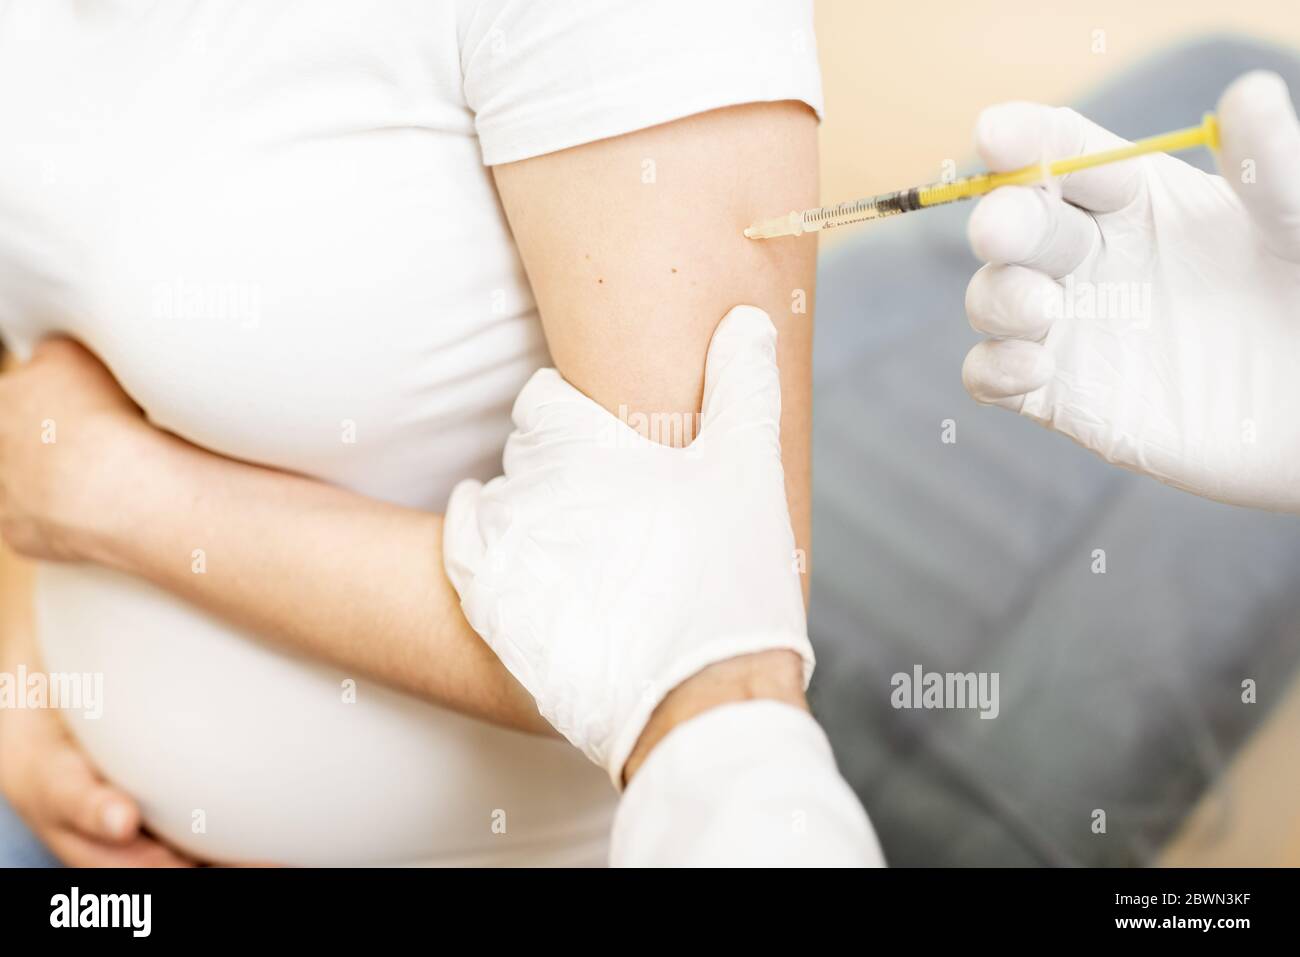 Vaccine injection procedure for a pregnant woman, cropped view without face Stock Photo